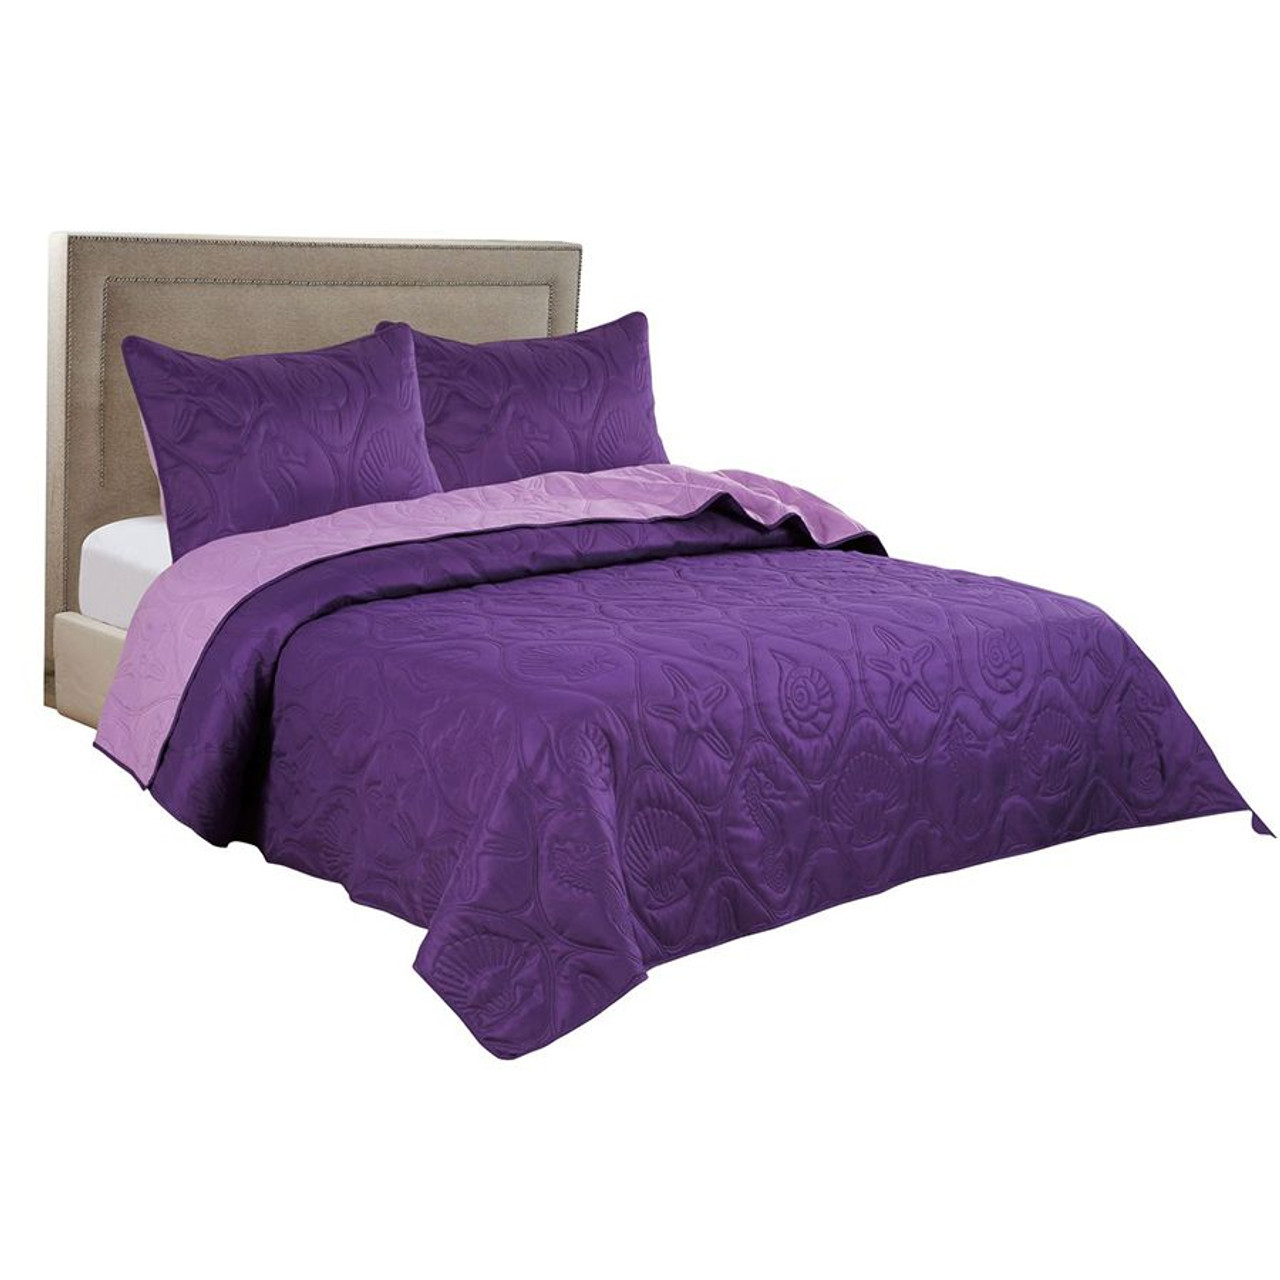 3 PC Shell & Seahorse Stitched Pinsonic Reversible Oversized Bedspread Purple Color